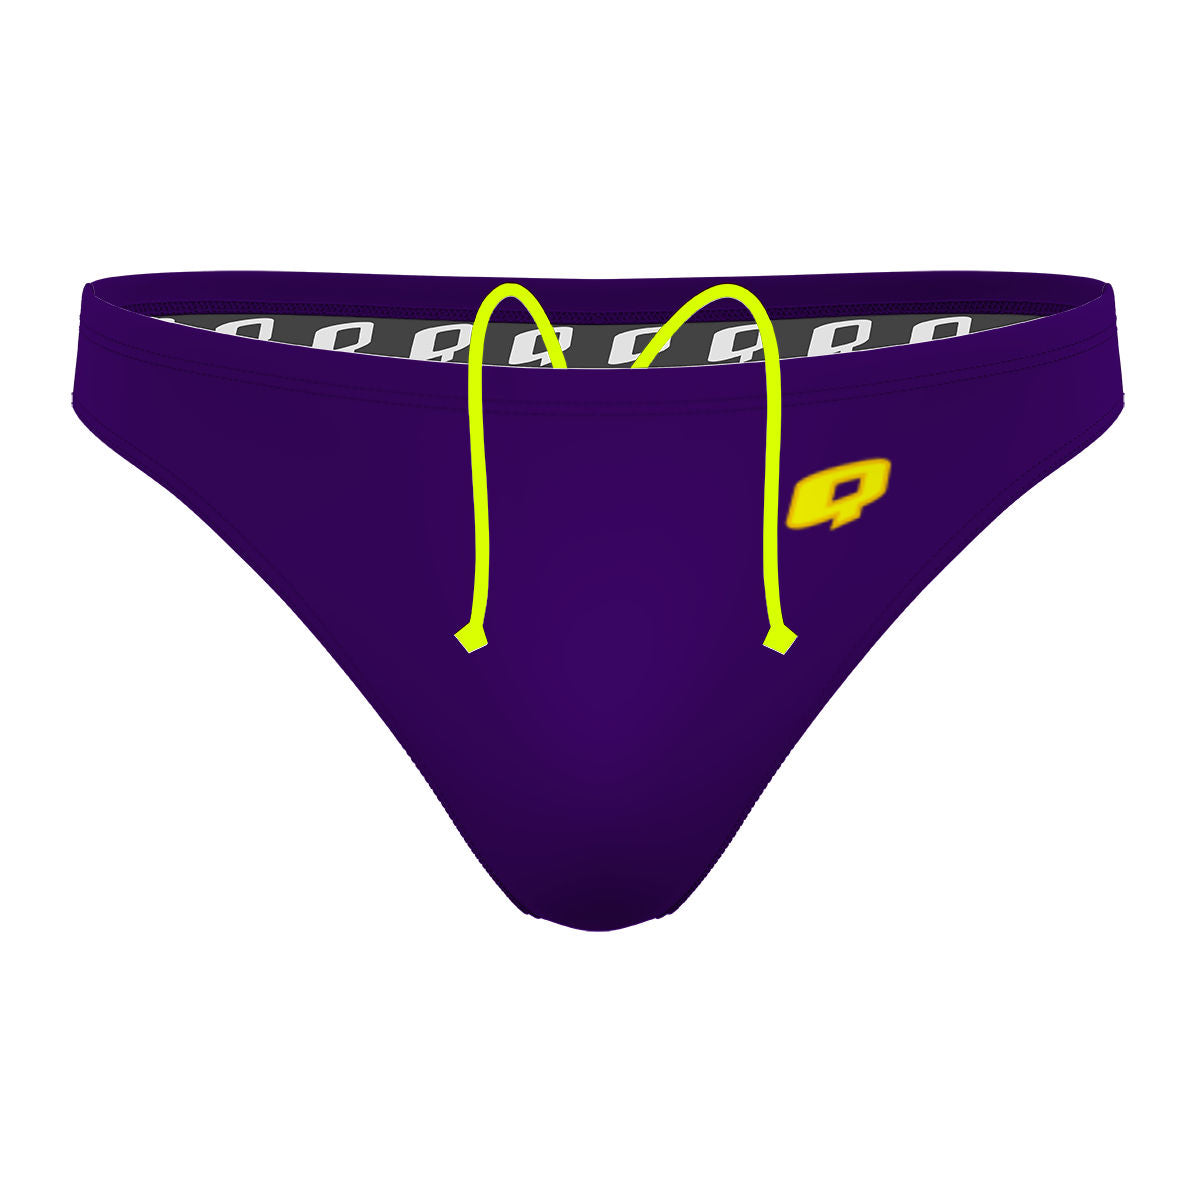 98triumpht595@gmail.com - Waterpolo Brief Swimsuit